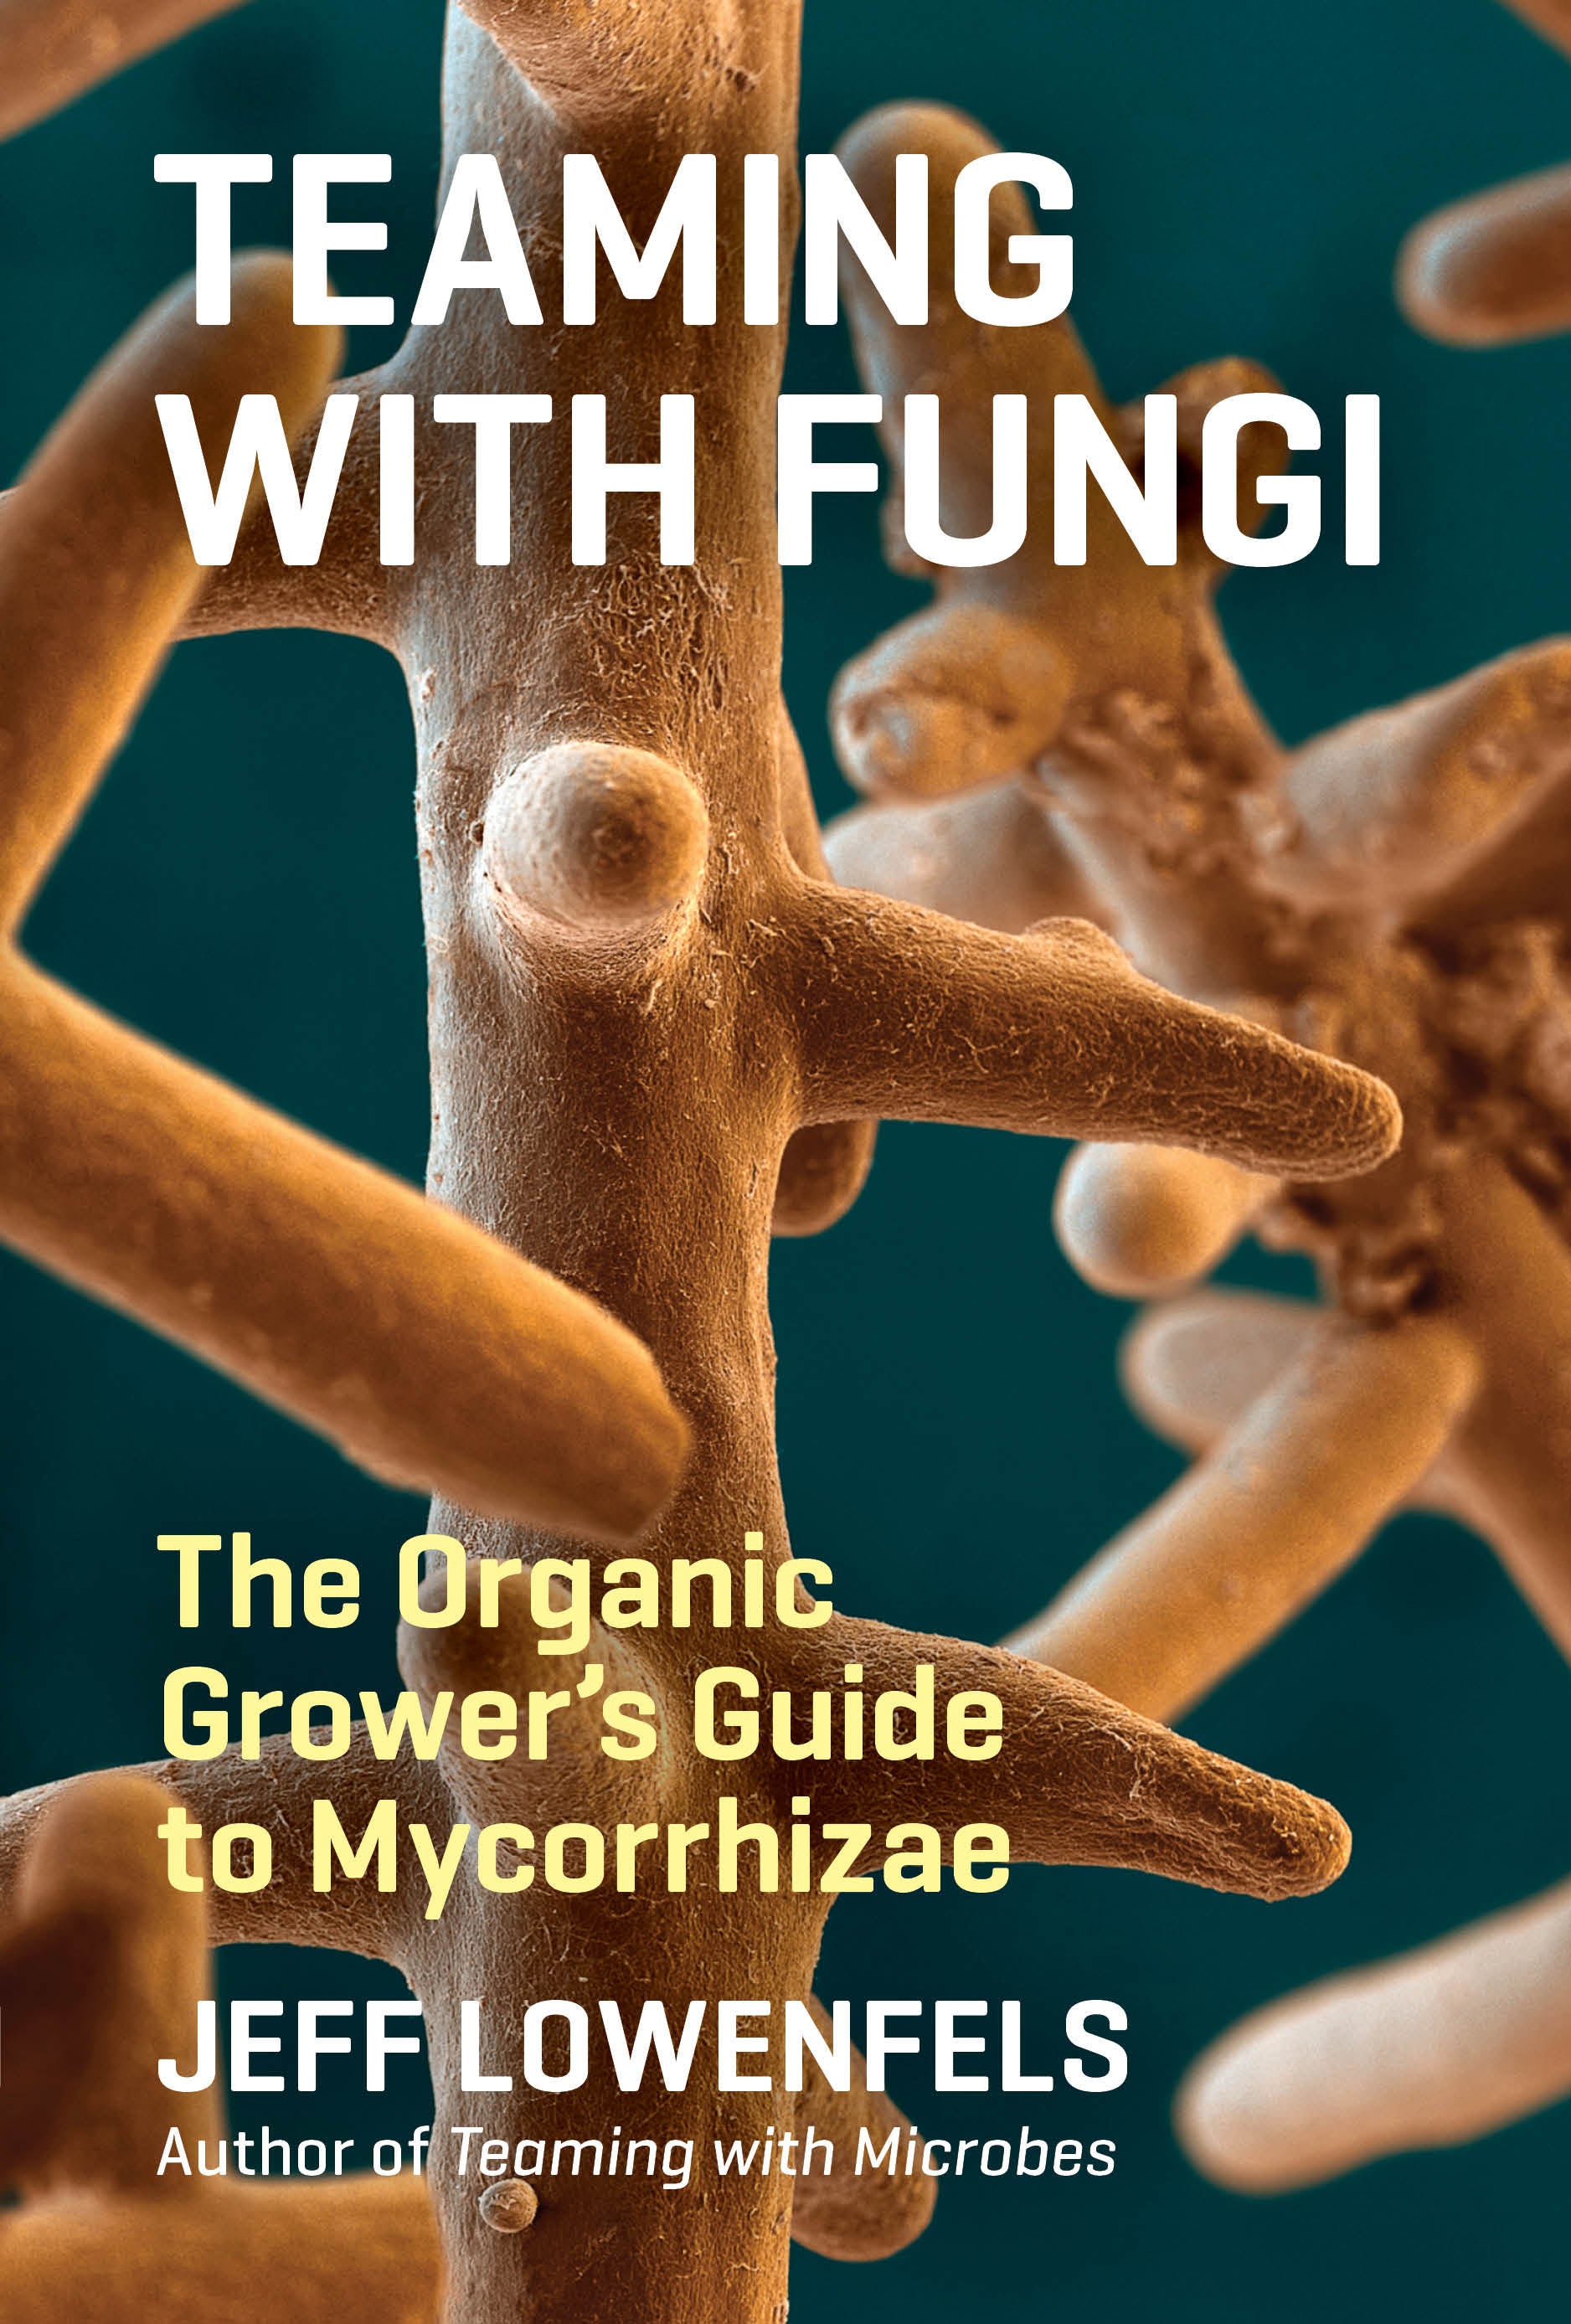 A teal cover with images of brown molecular structures of fungi.